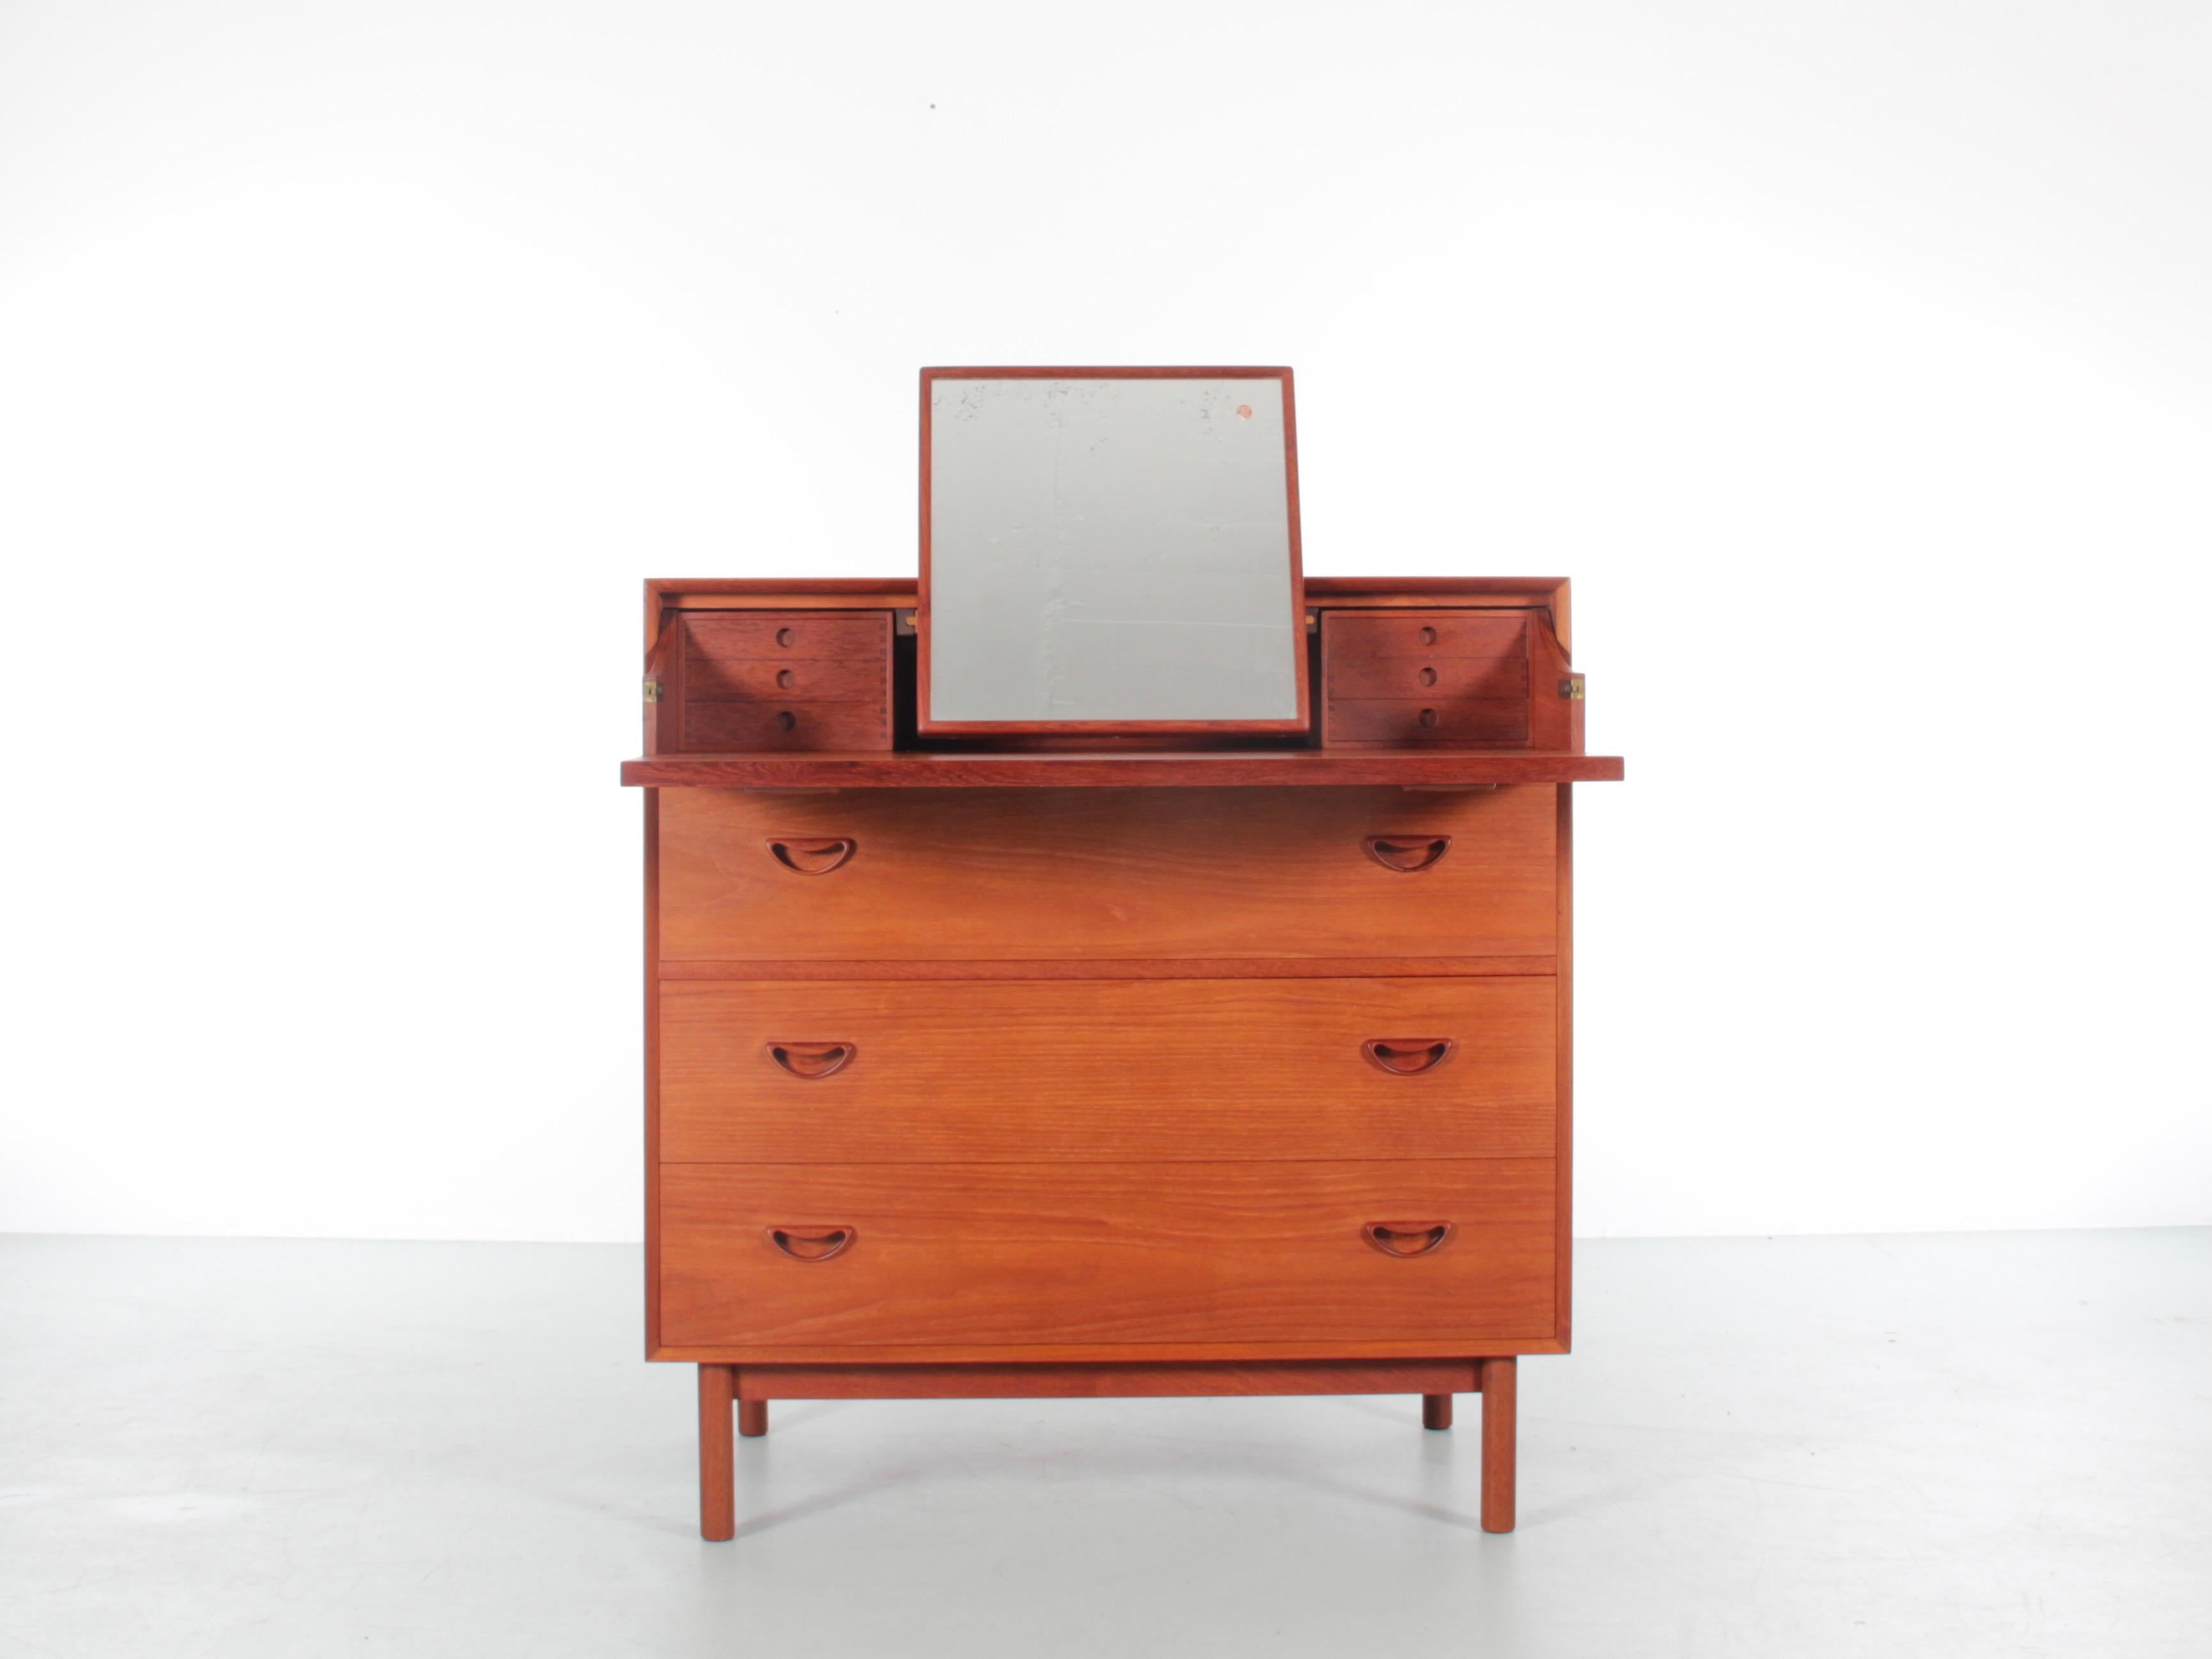 Solid teak chest of drawers by Peter Hvidt and Orla Mølgaard Nielsen with secretary hidden in the first drawer.